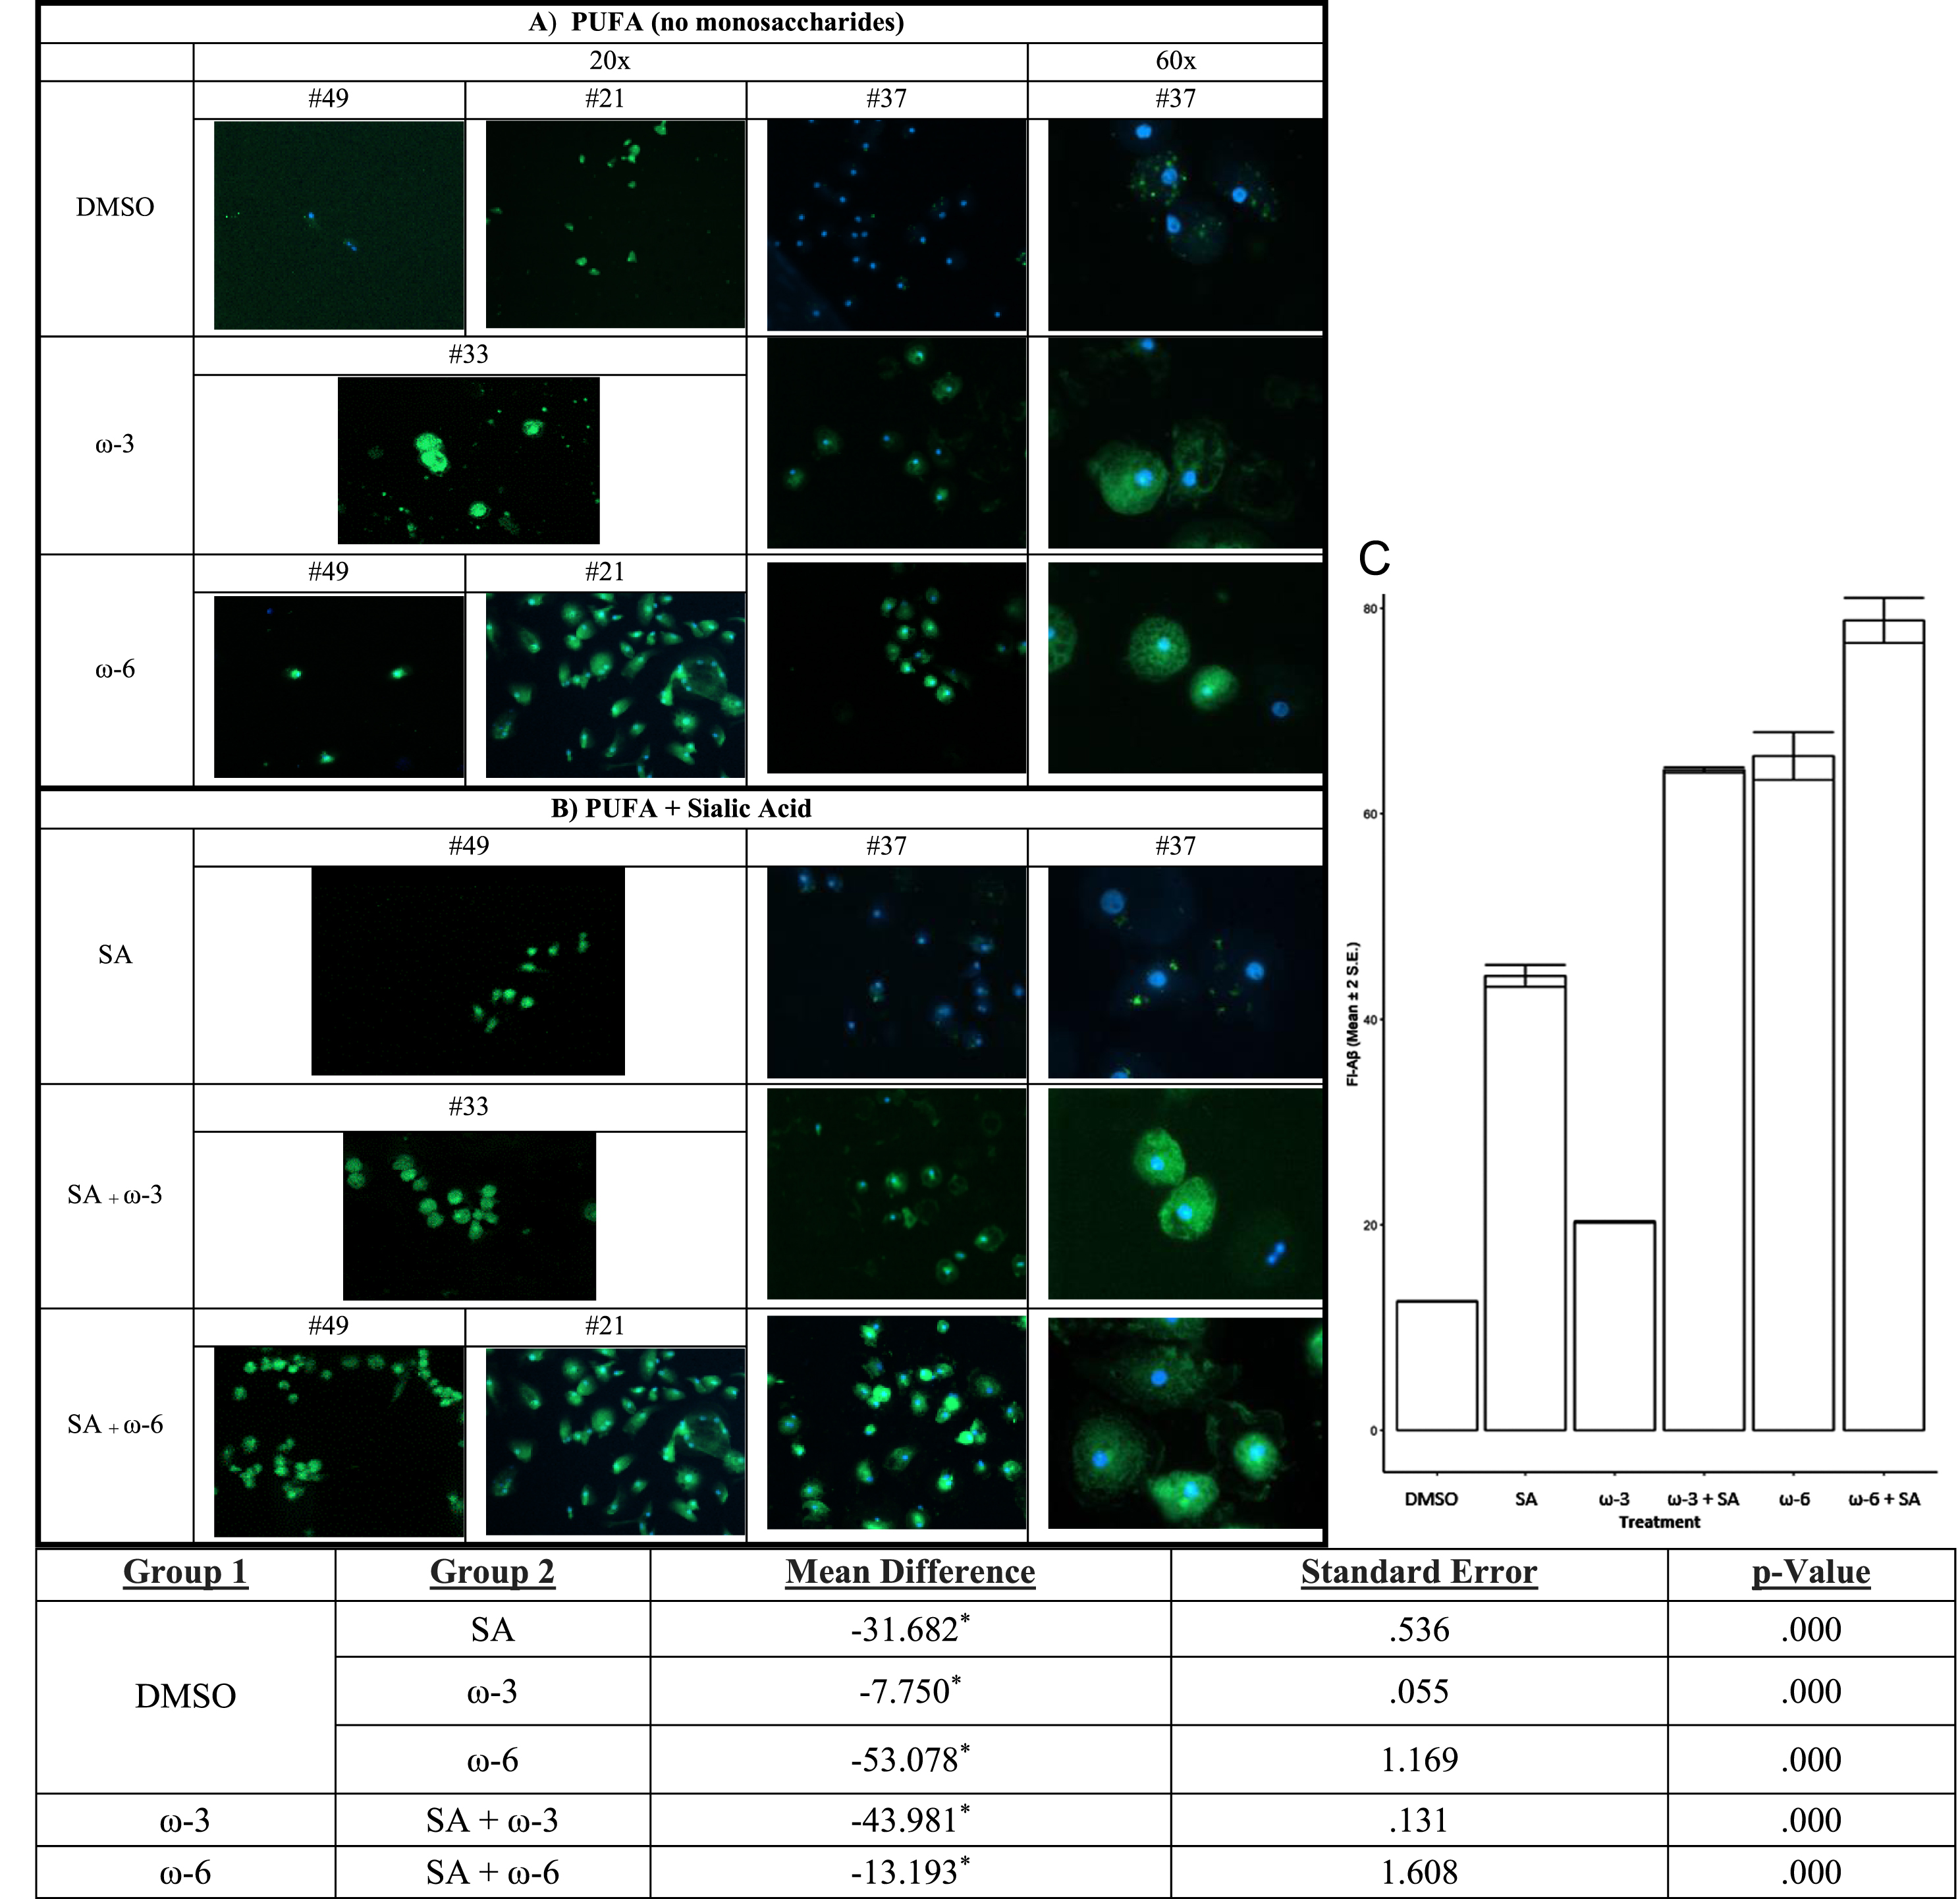 In vitro treatment of MCI patients’ macrophages by PUFA+/- sialic acid increase phagocytosis of soluble FITC-Aβ: Phagocytosis of Aβ is increased by: A) ω-3 (DHA and EPA) or ω-6 (EETs) and B) ω-3 (DHA and EPA) or ω-6 (EET) with sialic acid in the medium. C) The areas of fluorescence were scanned by Image-Pro and the data were analyzed for multiple comparisons of omega fatty acid versus DMSO (Mean and 2 SEmean of the areas of fluorescence (N) scanned by Image-Pro).